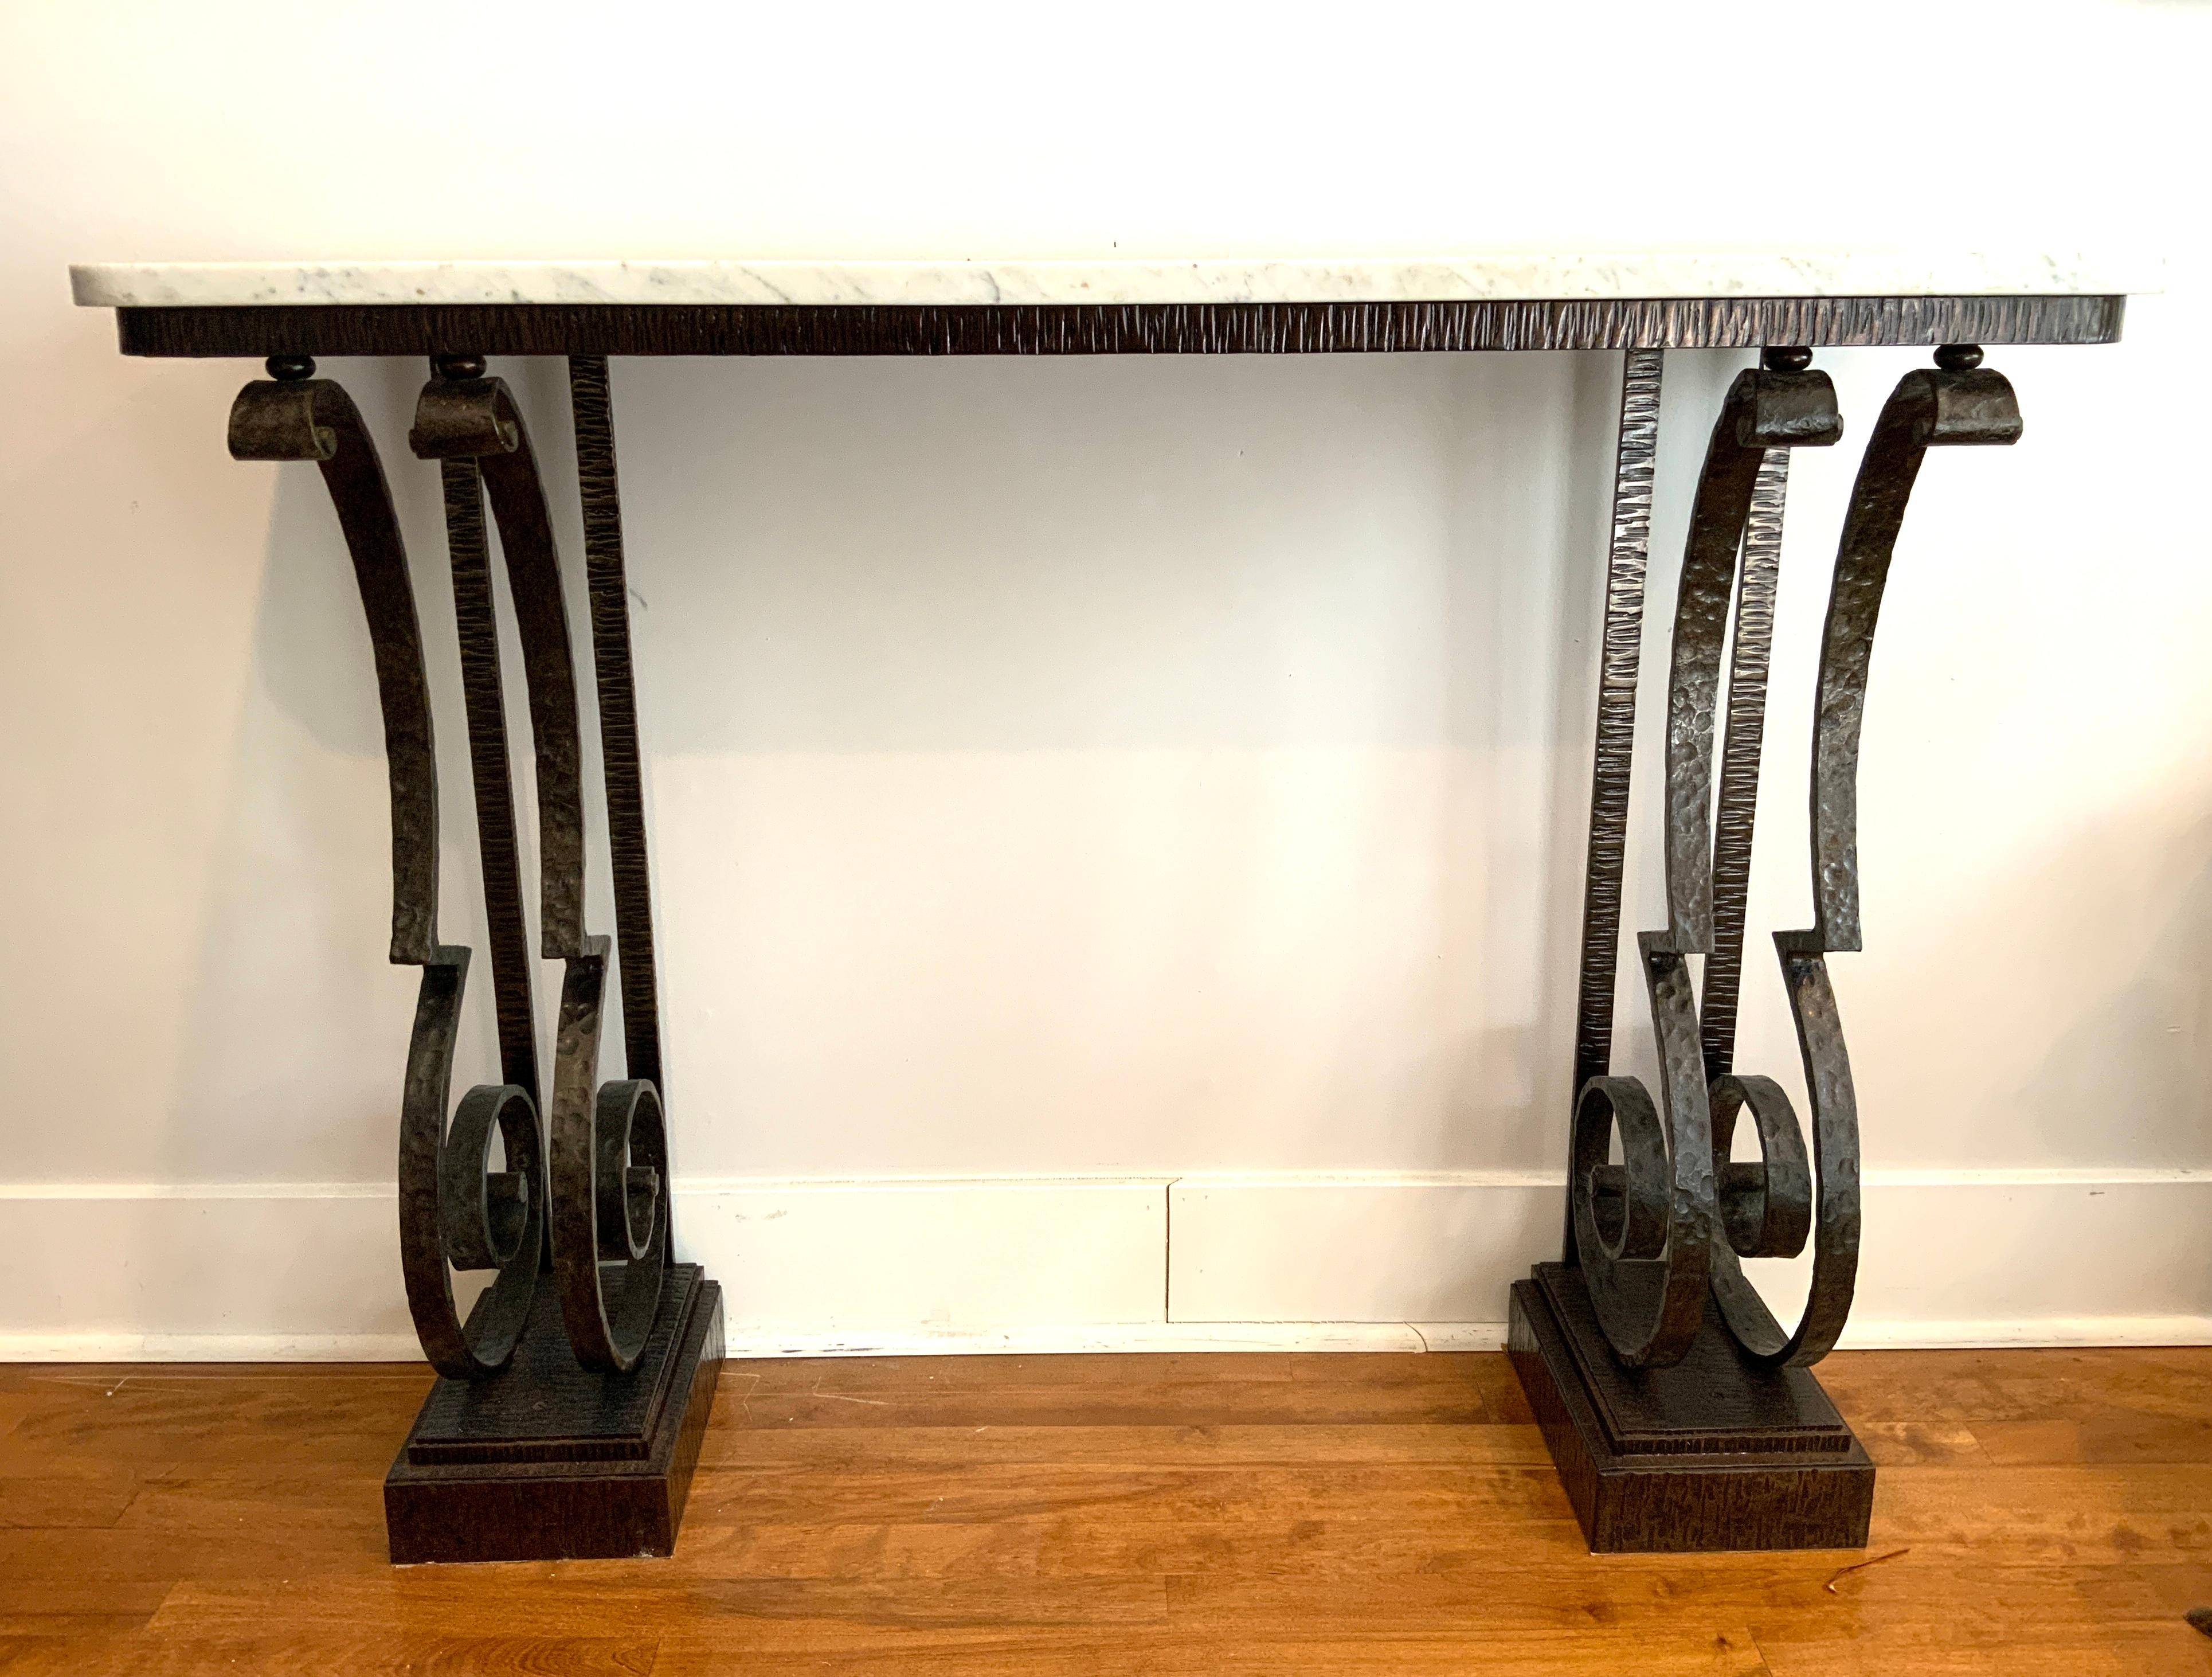 An exceptional Art Deco console table made from hand-hammered wrought iron (“fer forgé martelé” in French) with a white-veined marble top, ca. 1930’s, attributed to, we believe, Raymond Subes (1891-1970), the French Art Deco master metalworker and a